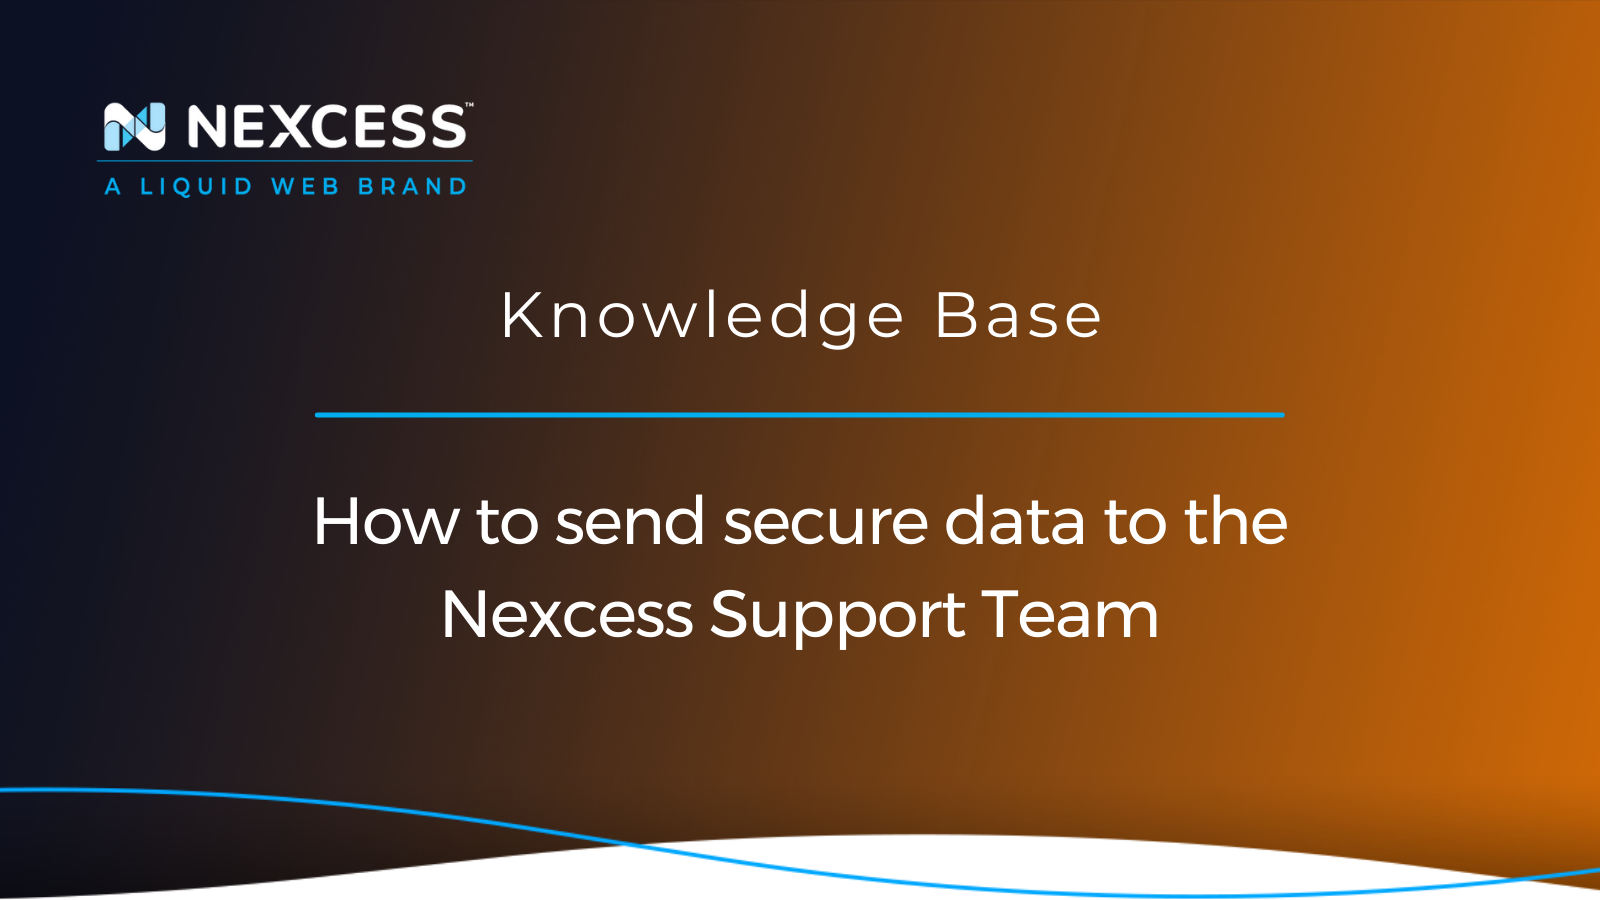 How to send secure data to the Nexcess Support Team